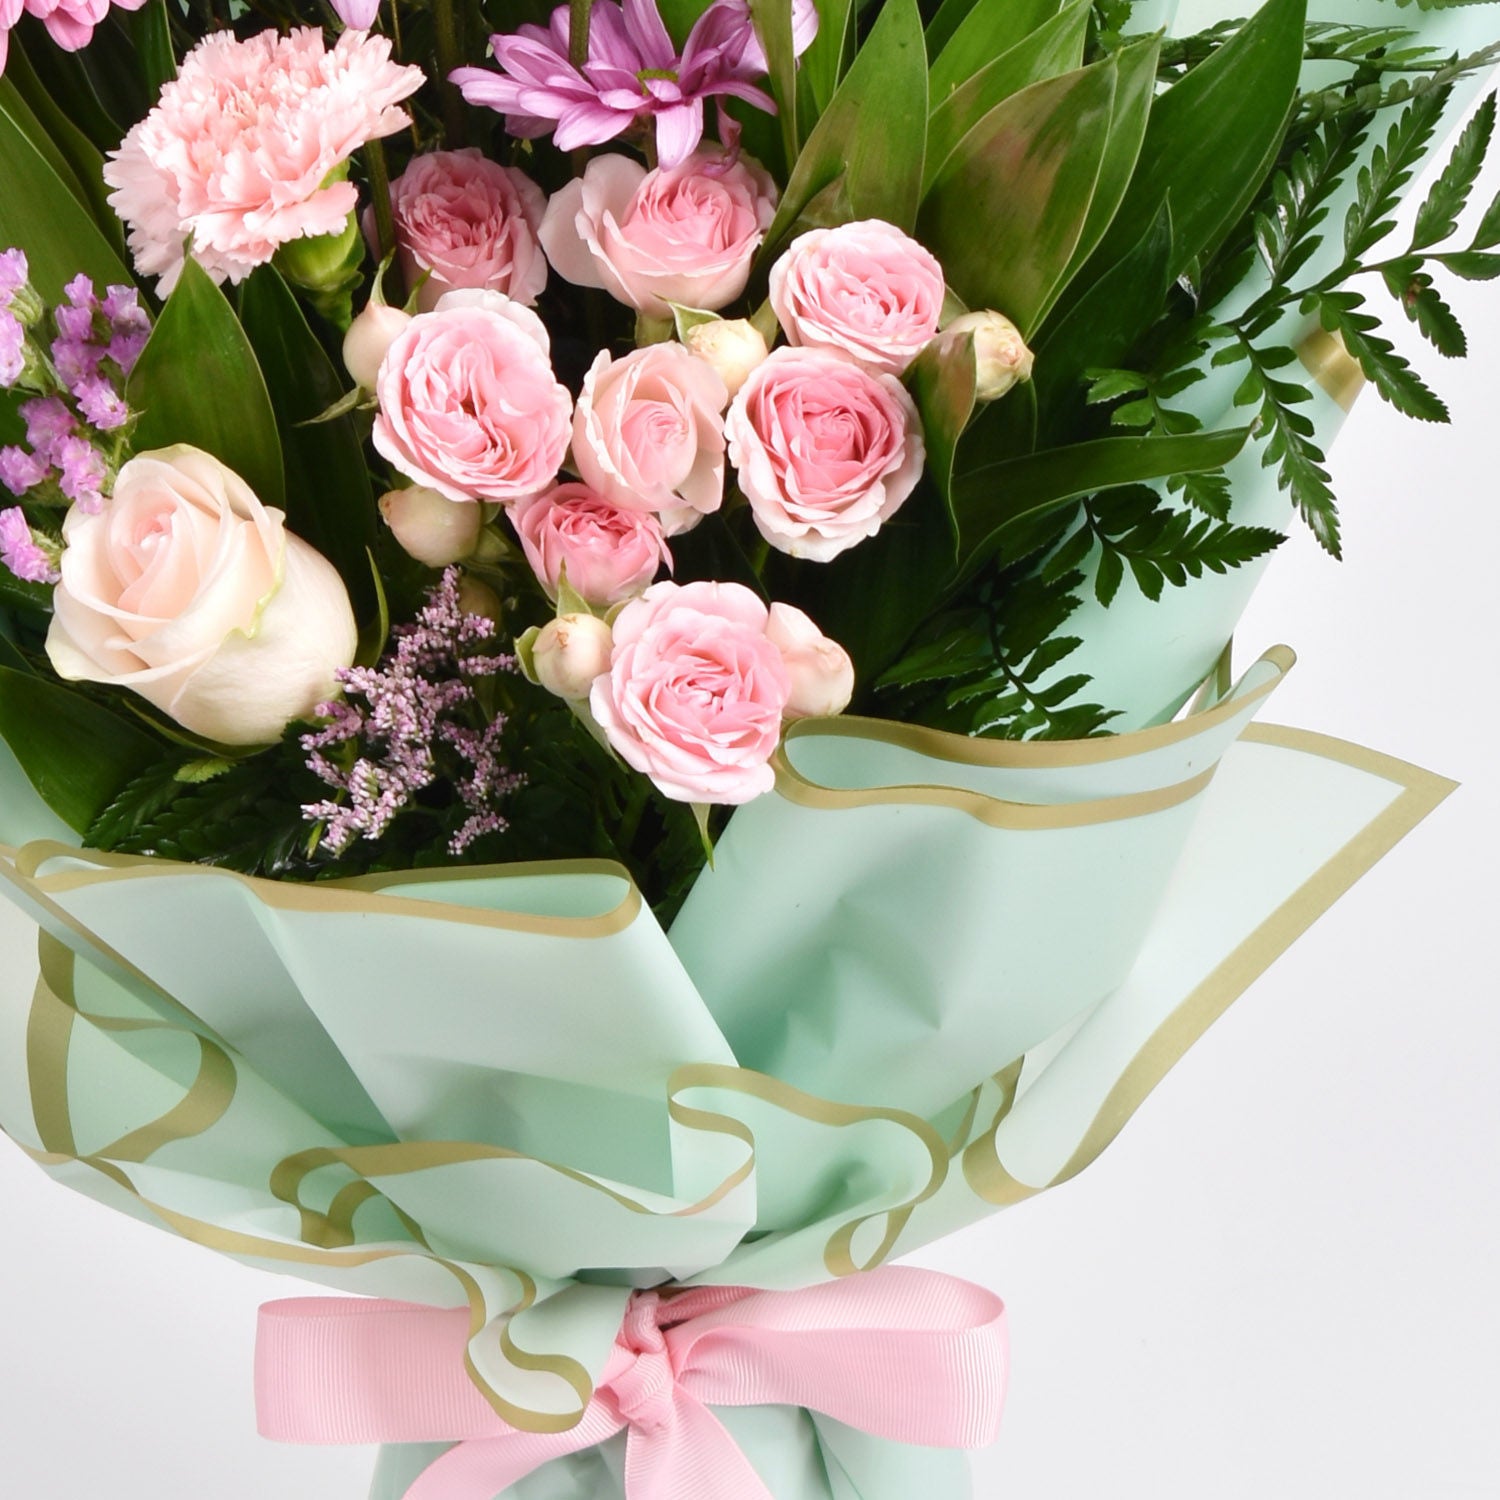 Pastel Pink and Green Bouquet